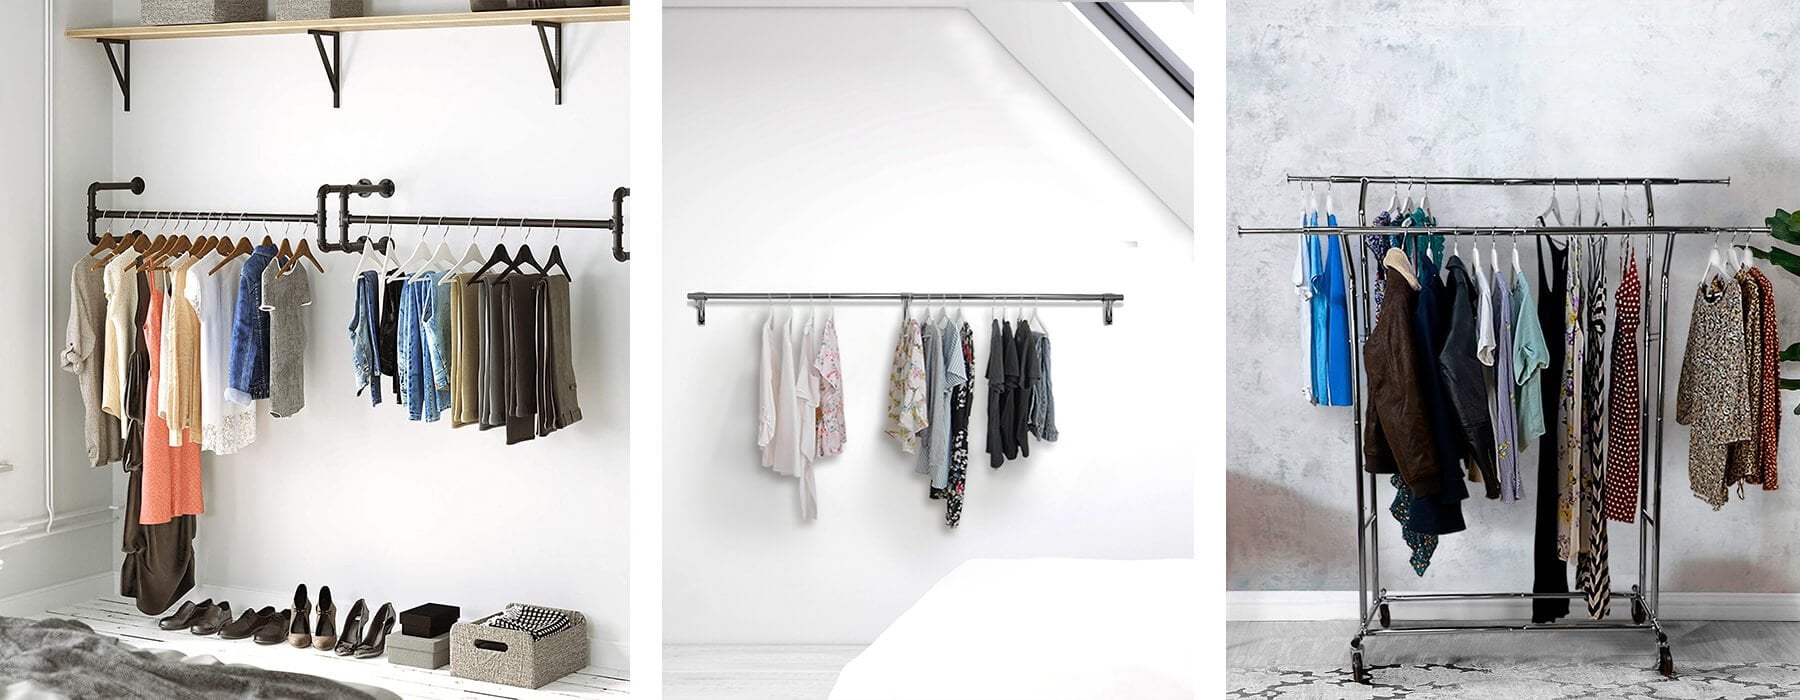 wall mounted rails and clothes rails 